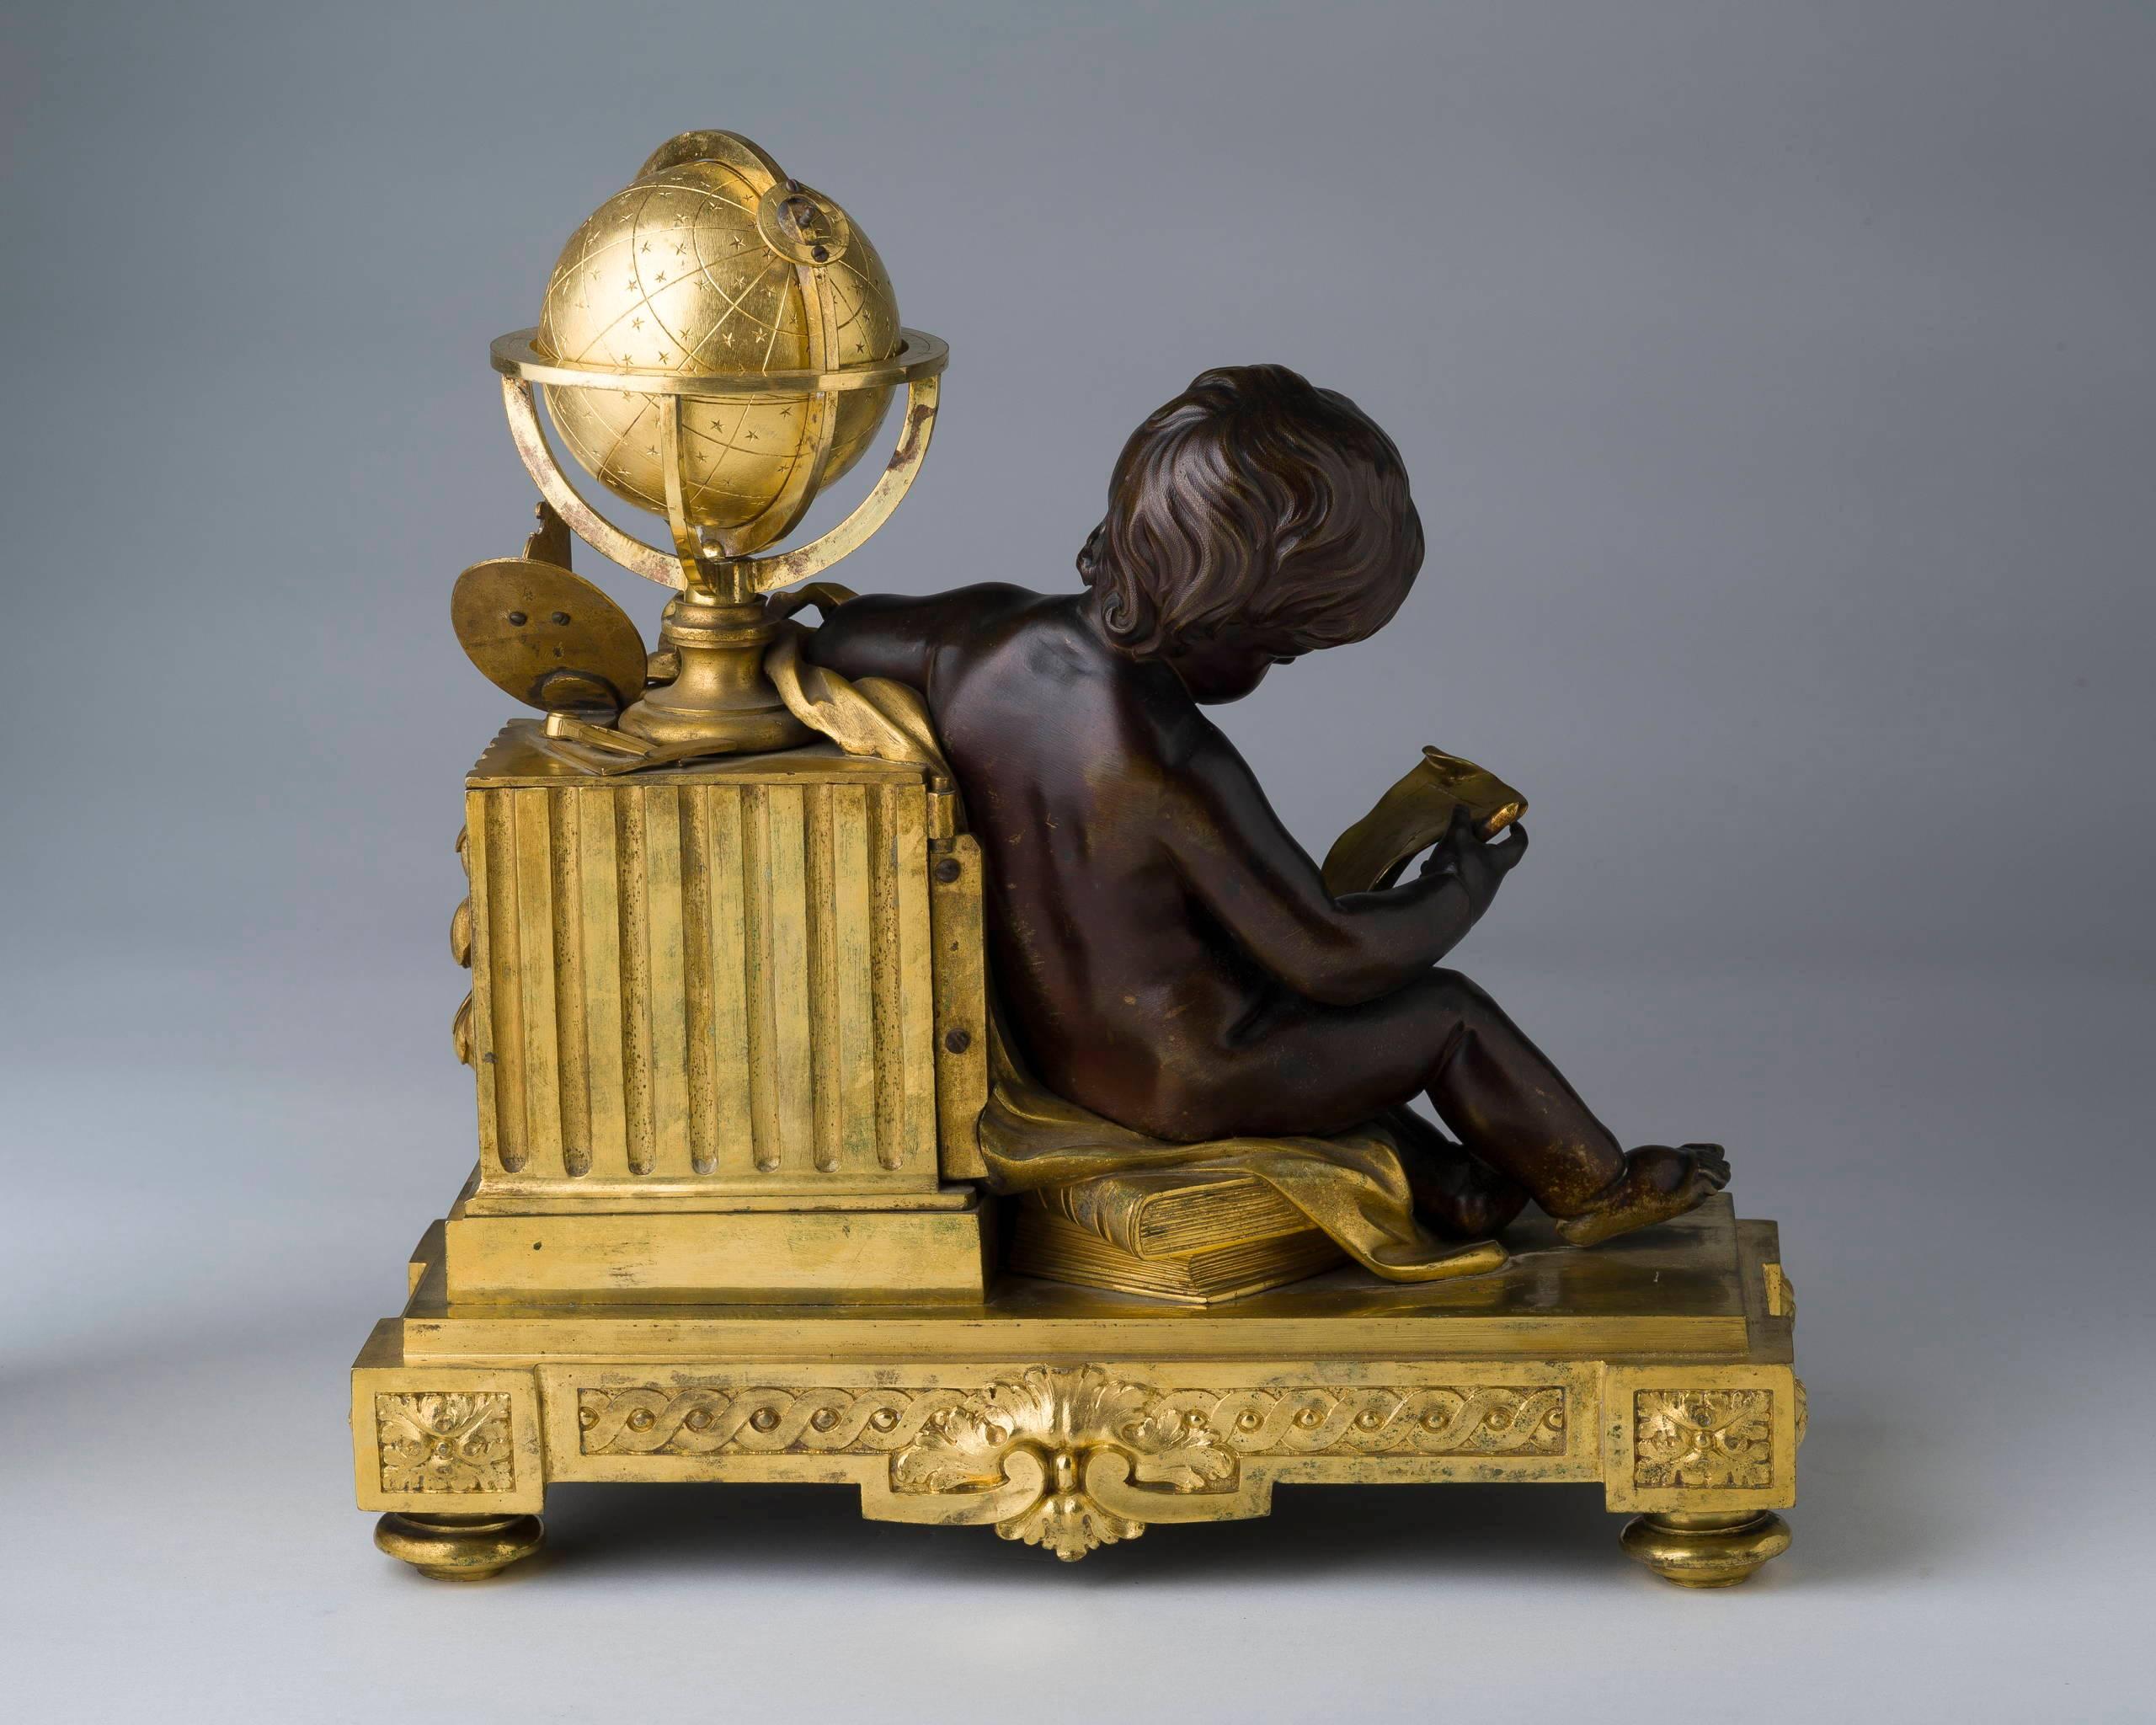 Depicting the personification of knowledge, on a plinth cast with molded guilloche and corner floral medallions, the clock decorated with symbols of knowledge and education, a patinated bronze putto sitting atop a stack of books, depicted studying